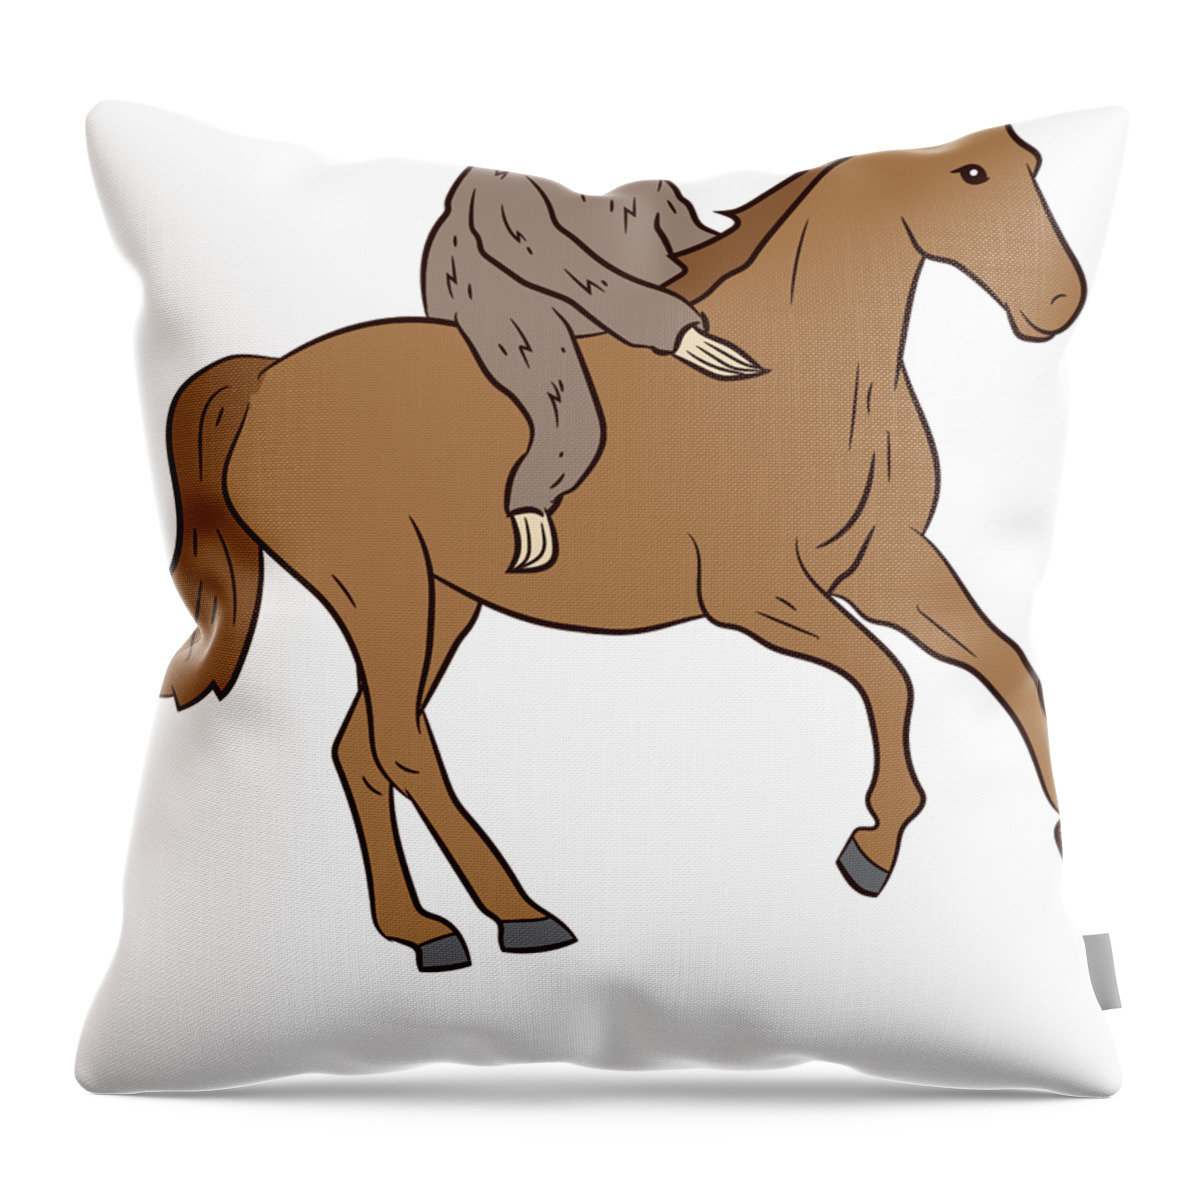 Multicolor Cool Horse Riding Tees Funny Rides Horse Sloths Lover Throw Pillow 16x16